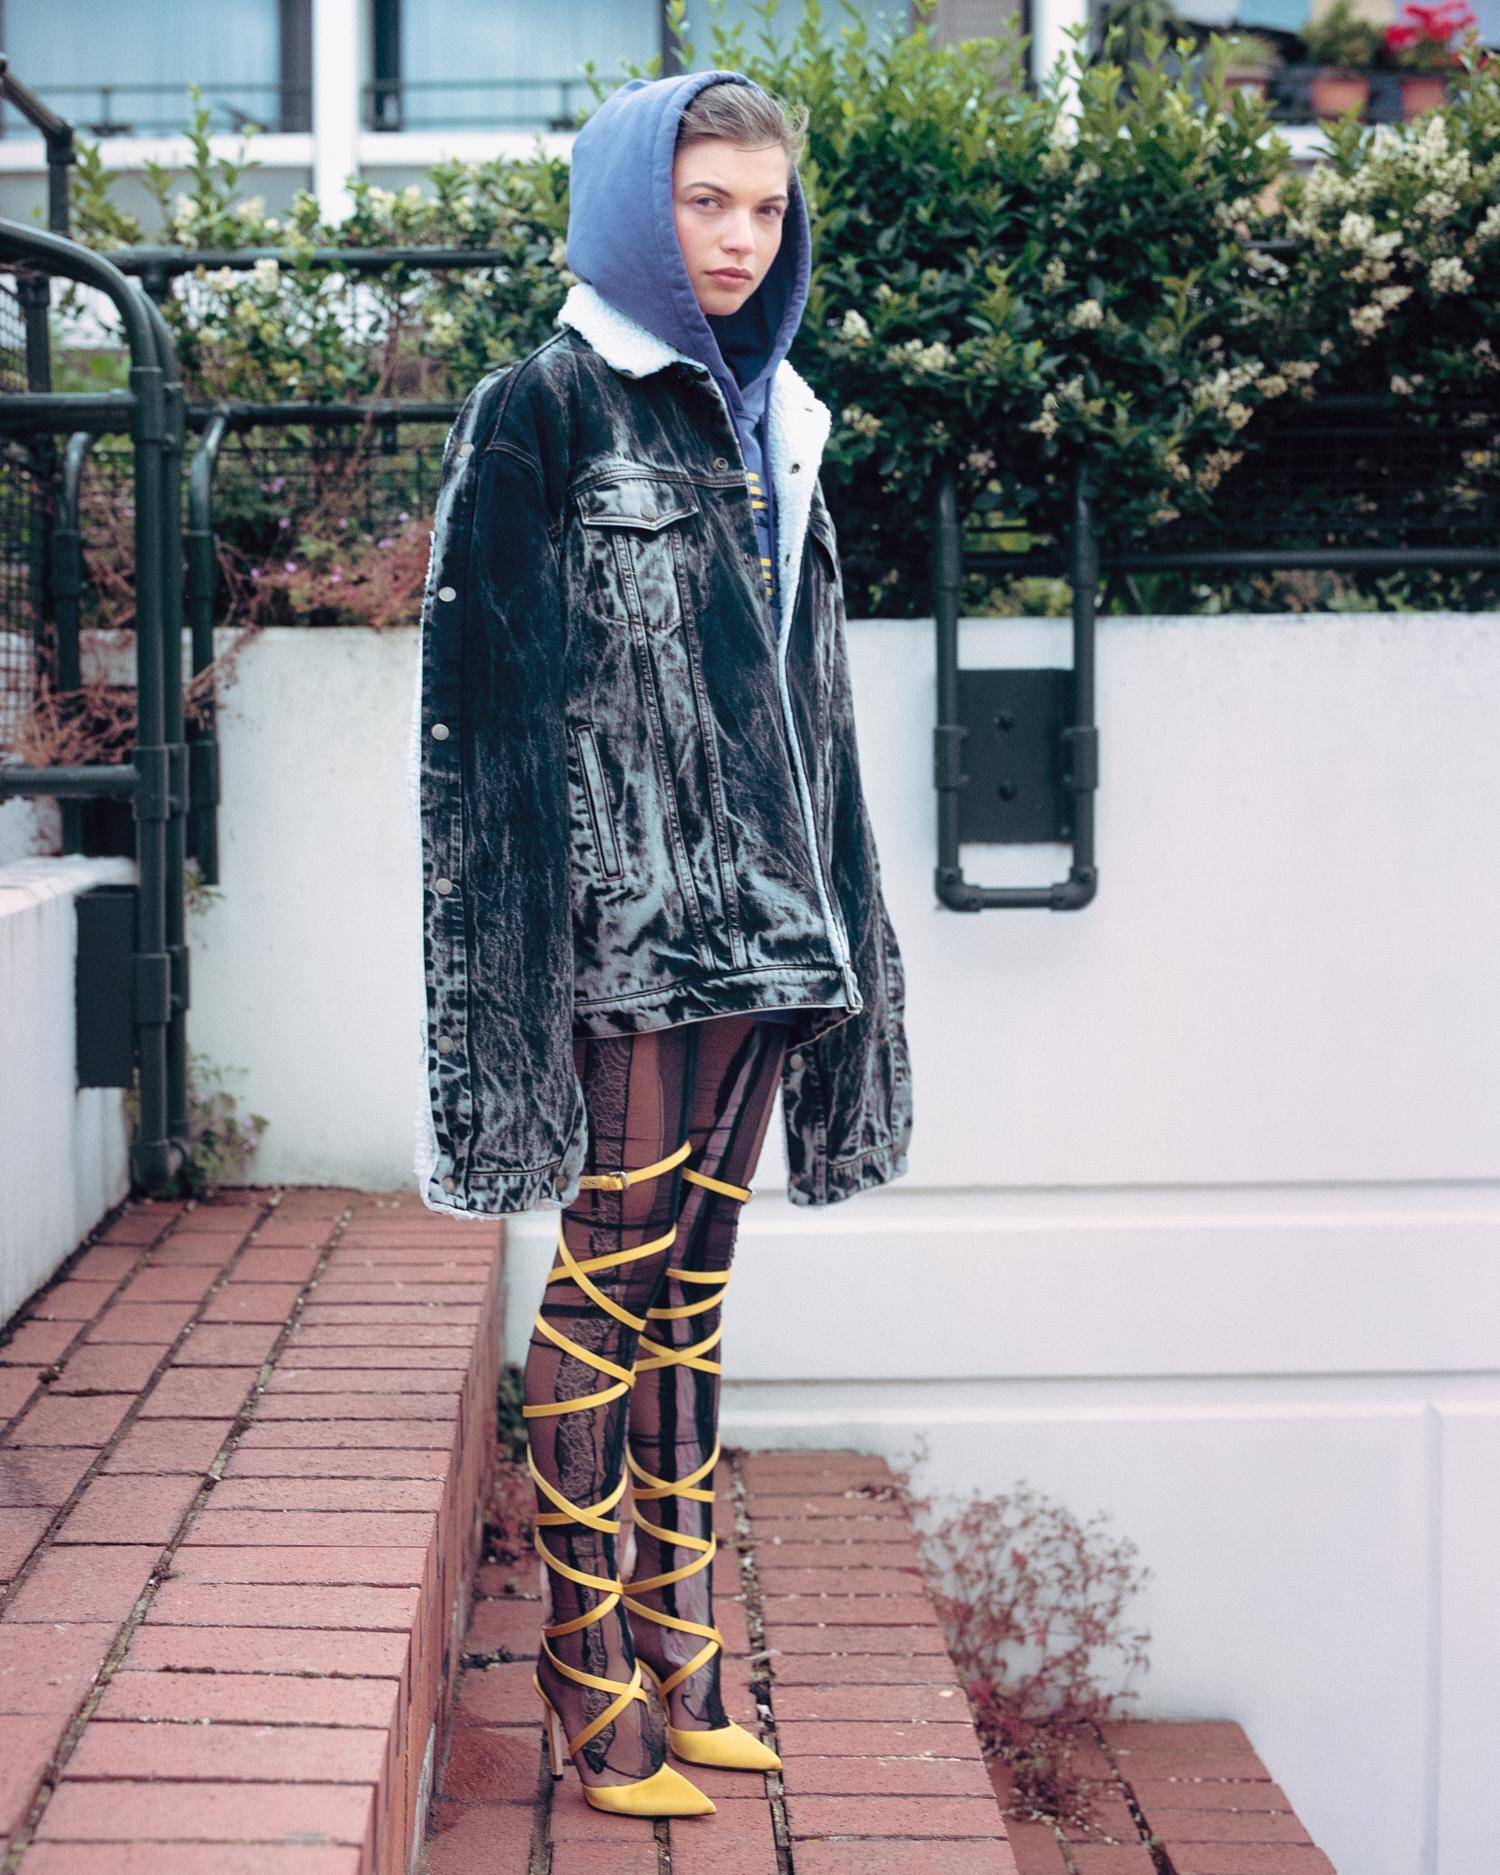 Maggie wears Y-Project, Blumarine and MSGM, shot in London